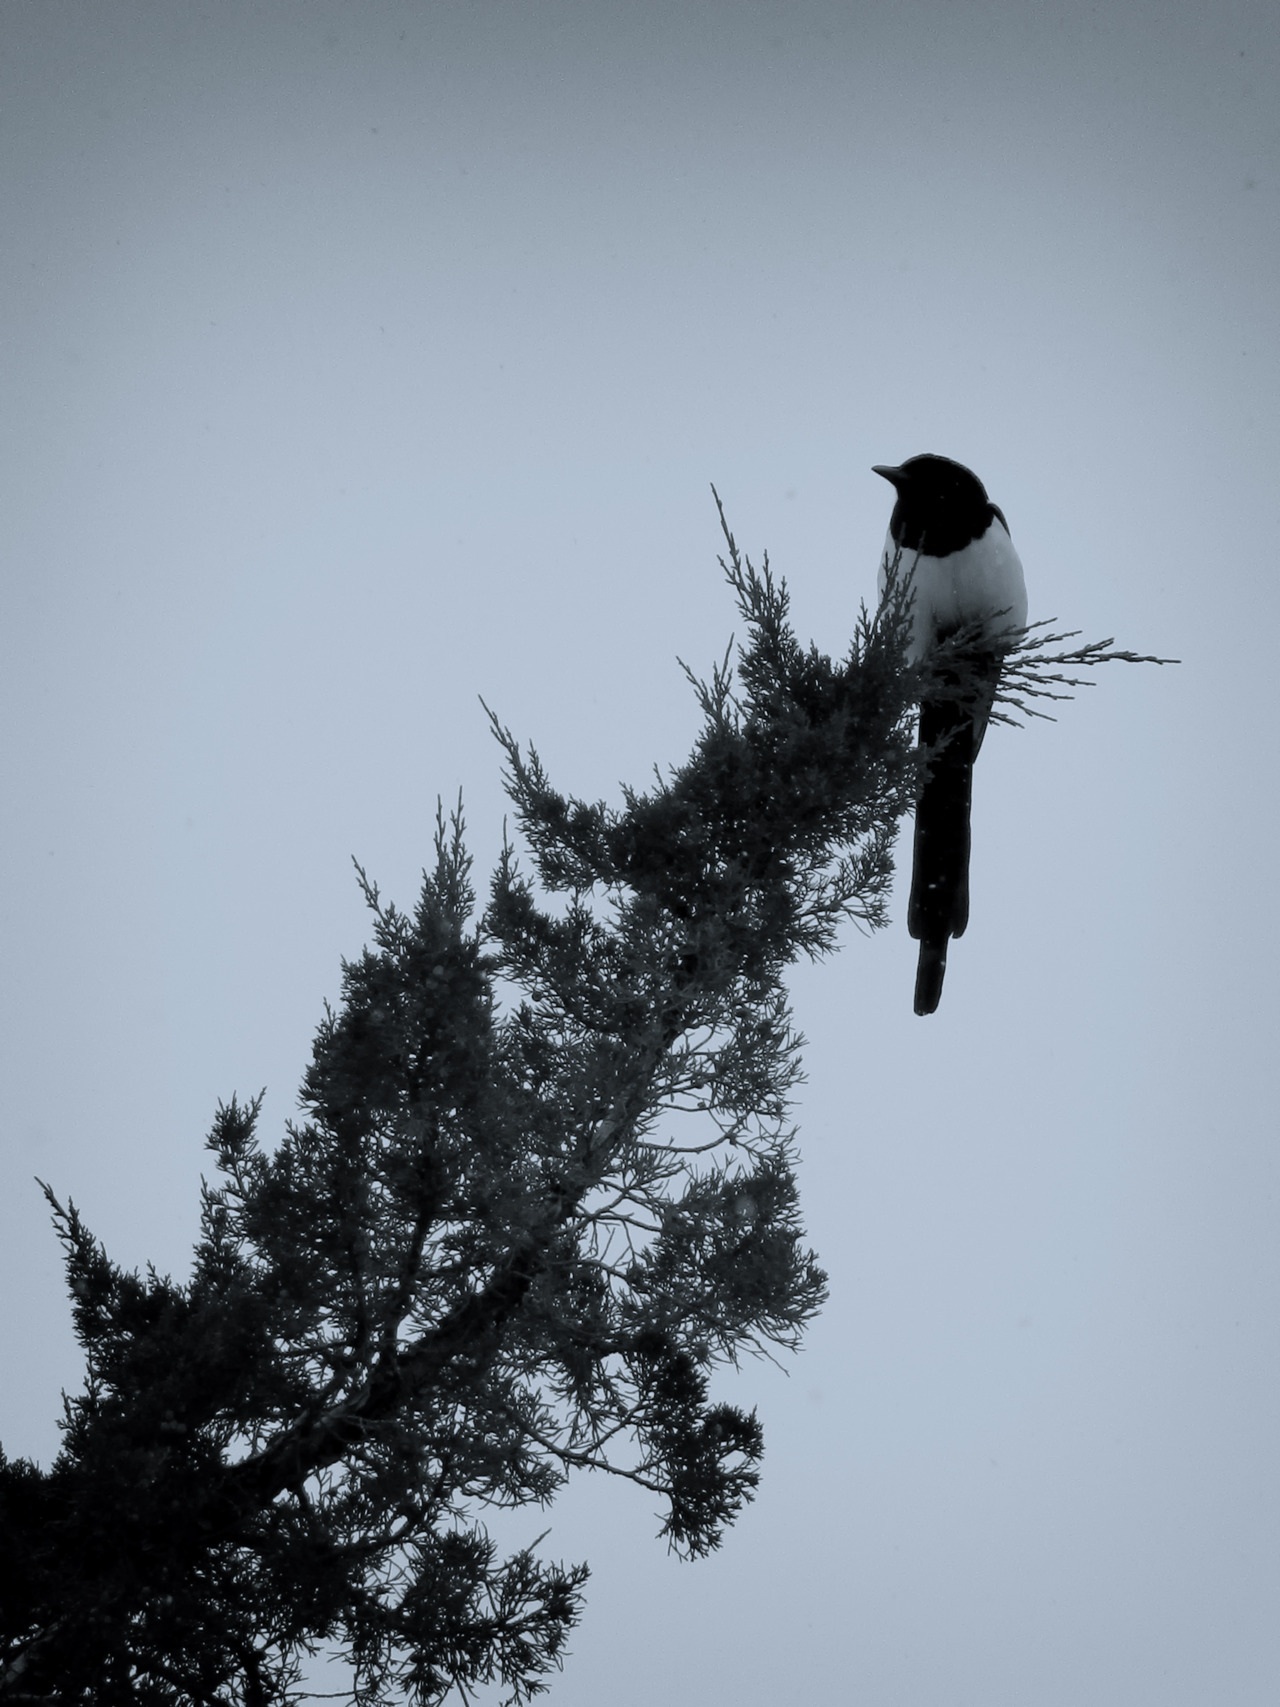 According to the tags on this, this is a picture of a magpie on a juniper tree. Words